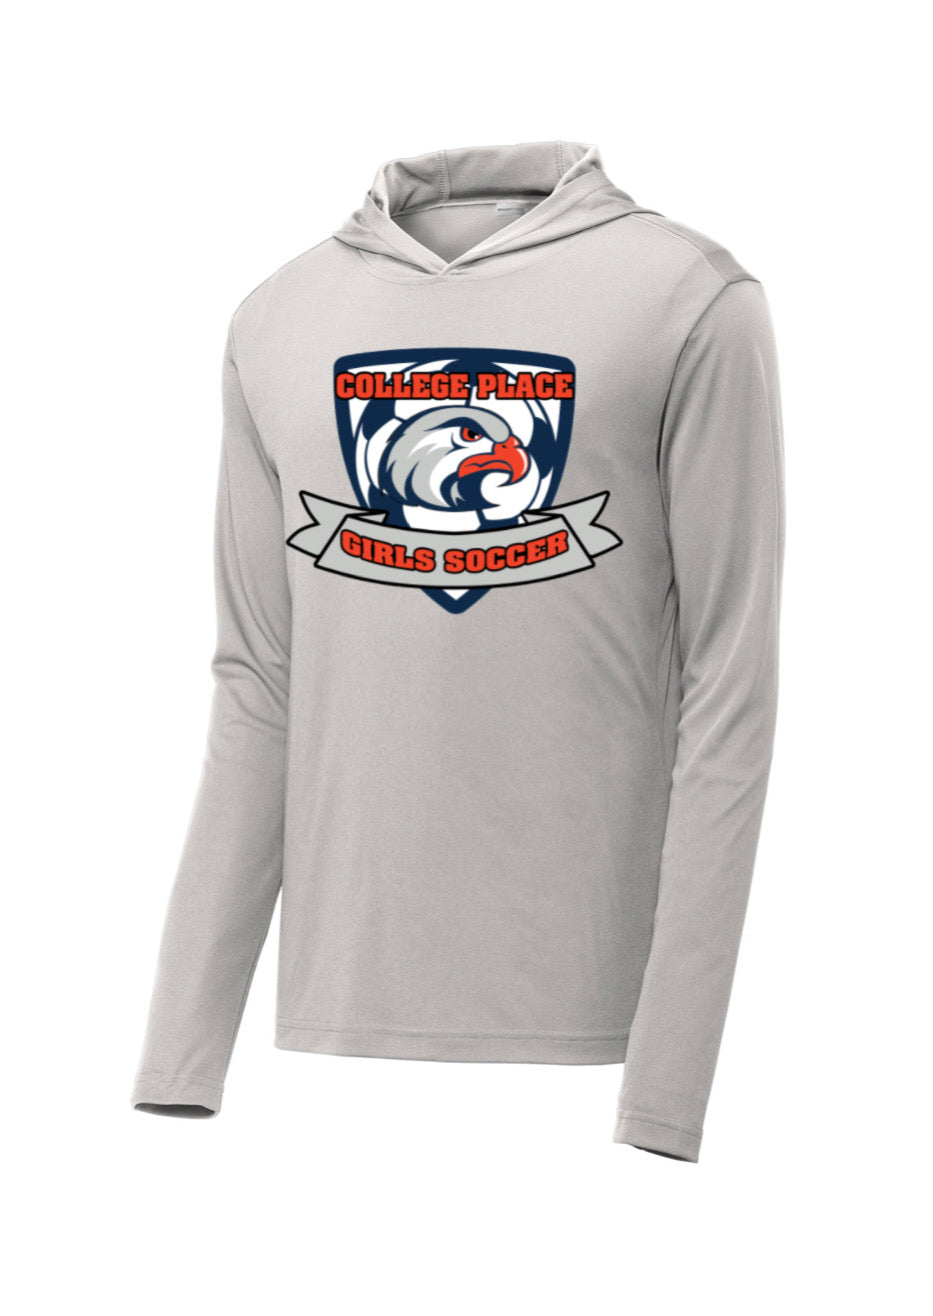 Hawks Soccer - Performance Hooded Pullover - Multiple Color Options - (ALL PRODUCTS WILL BE DELIVERED TO SCHOOL)